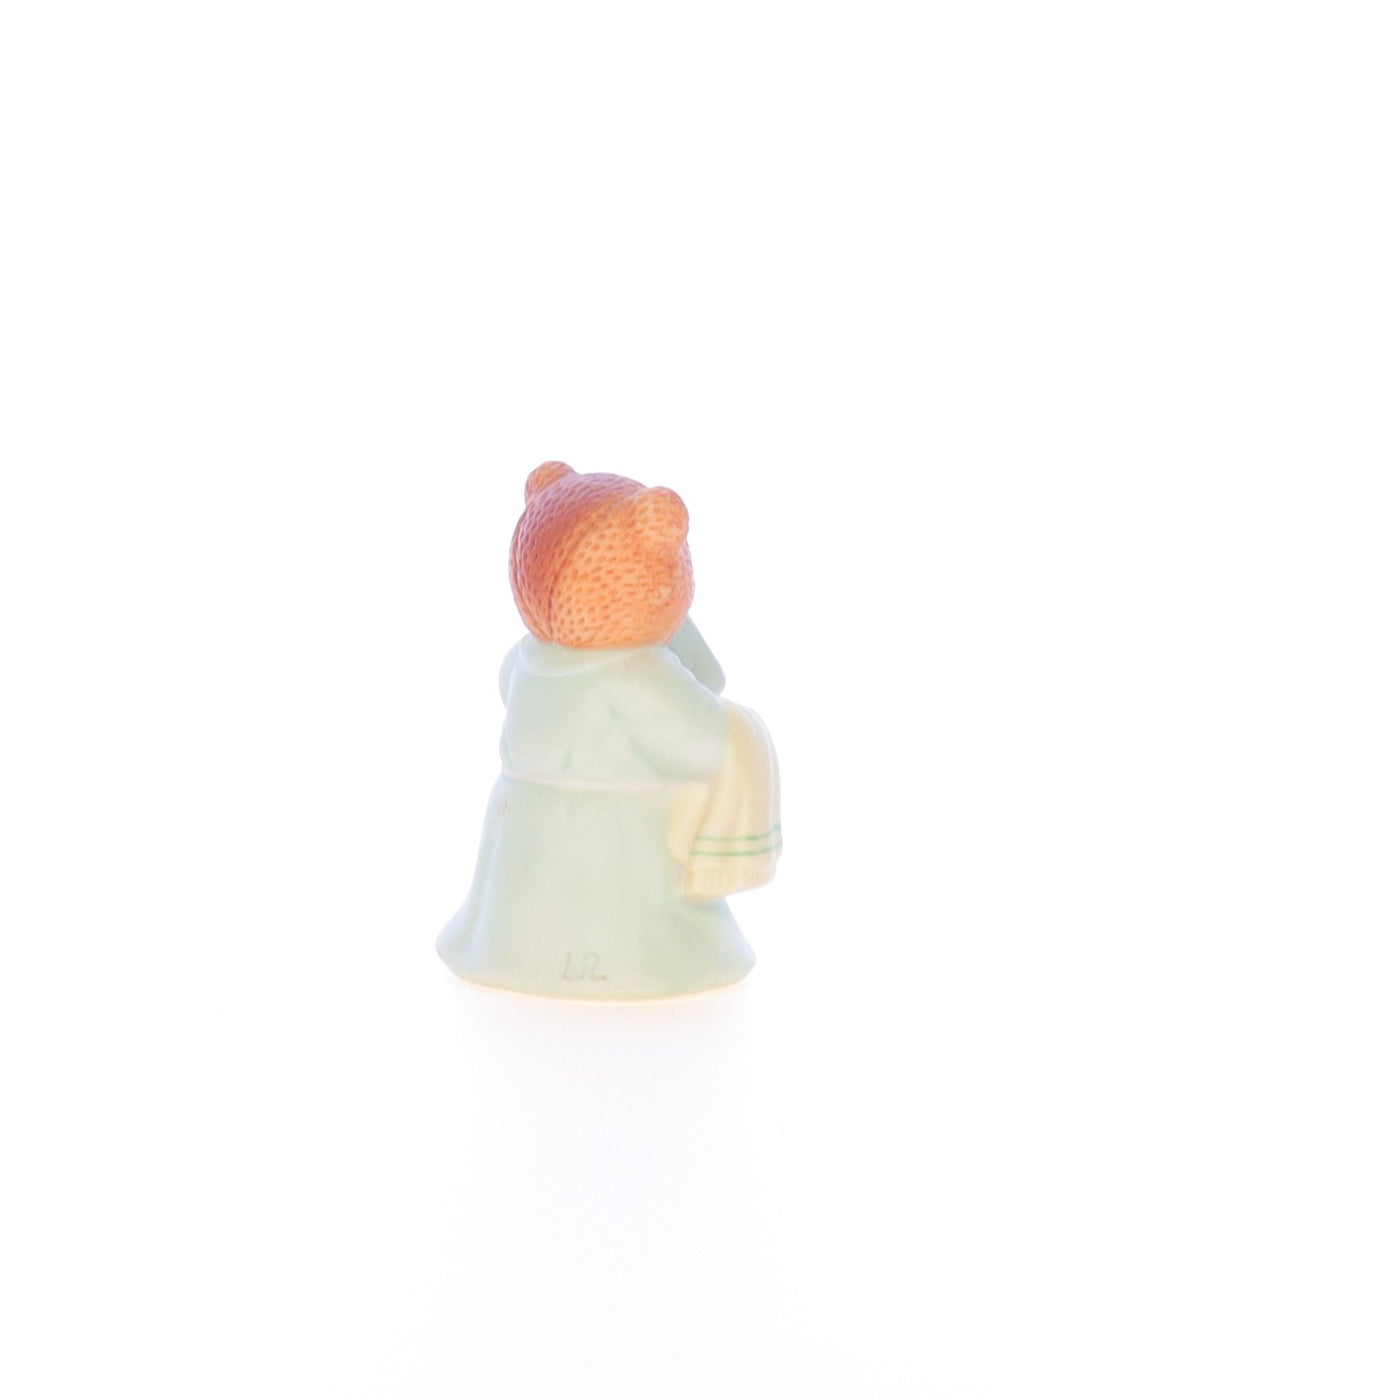 Lucy_And_Me_by_Lucy_Atwell_Porcelain_Figurine_Bear_with_Bath_Robe_Lucy_Unknown_010_06